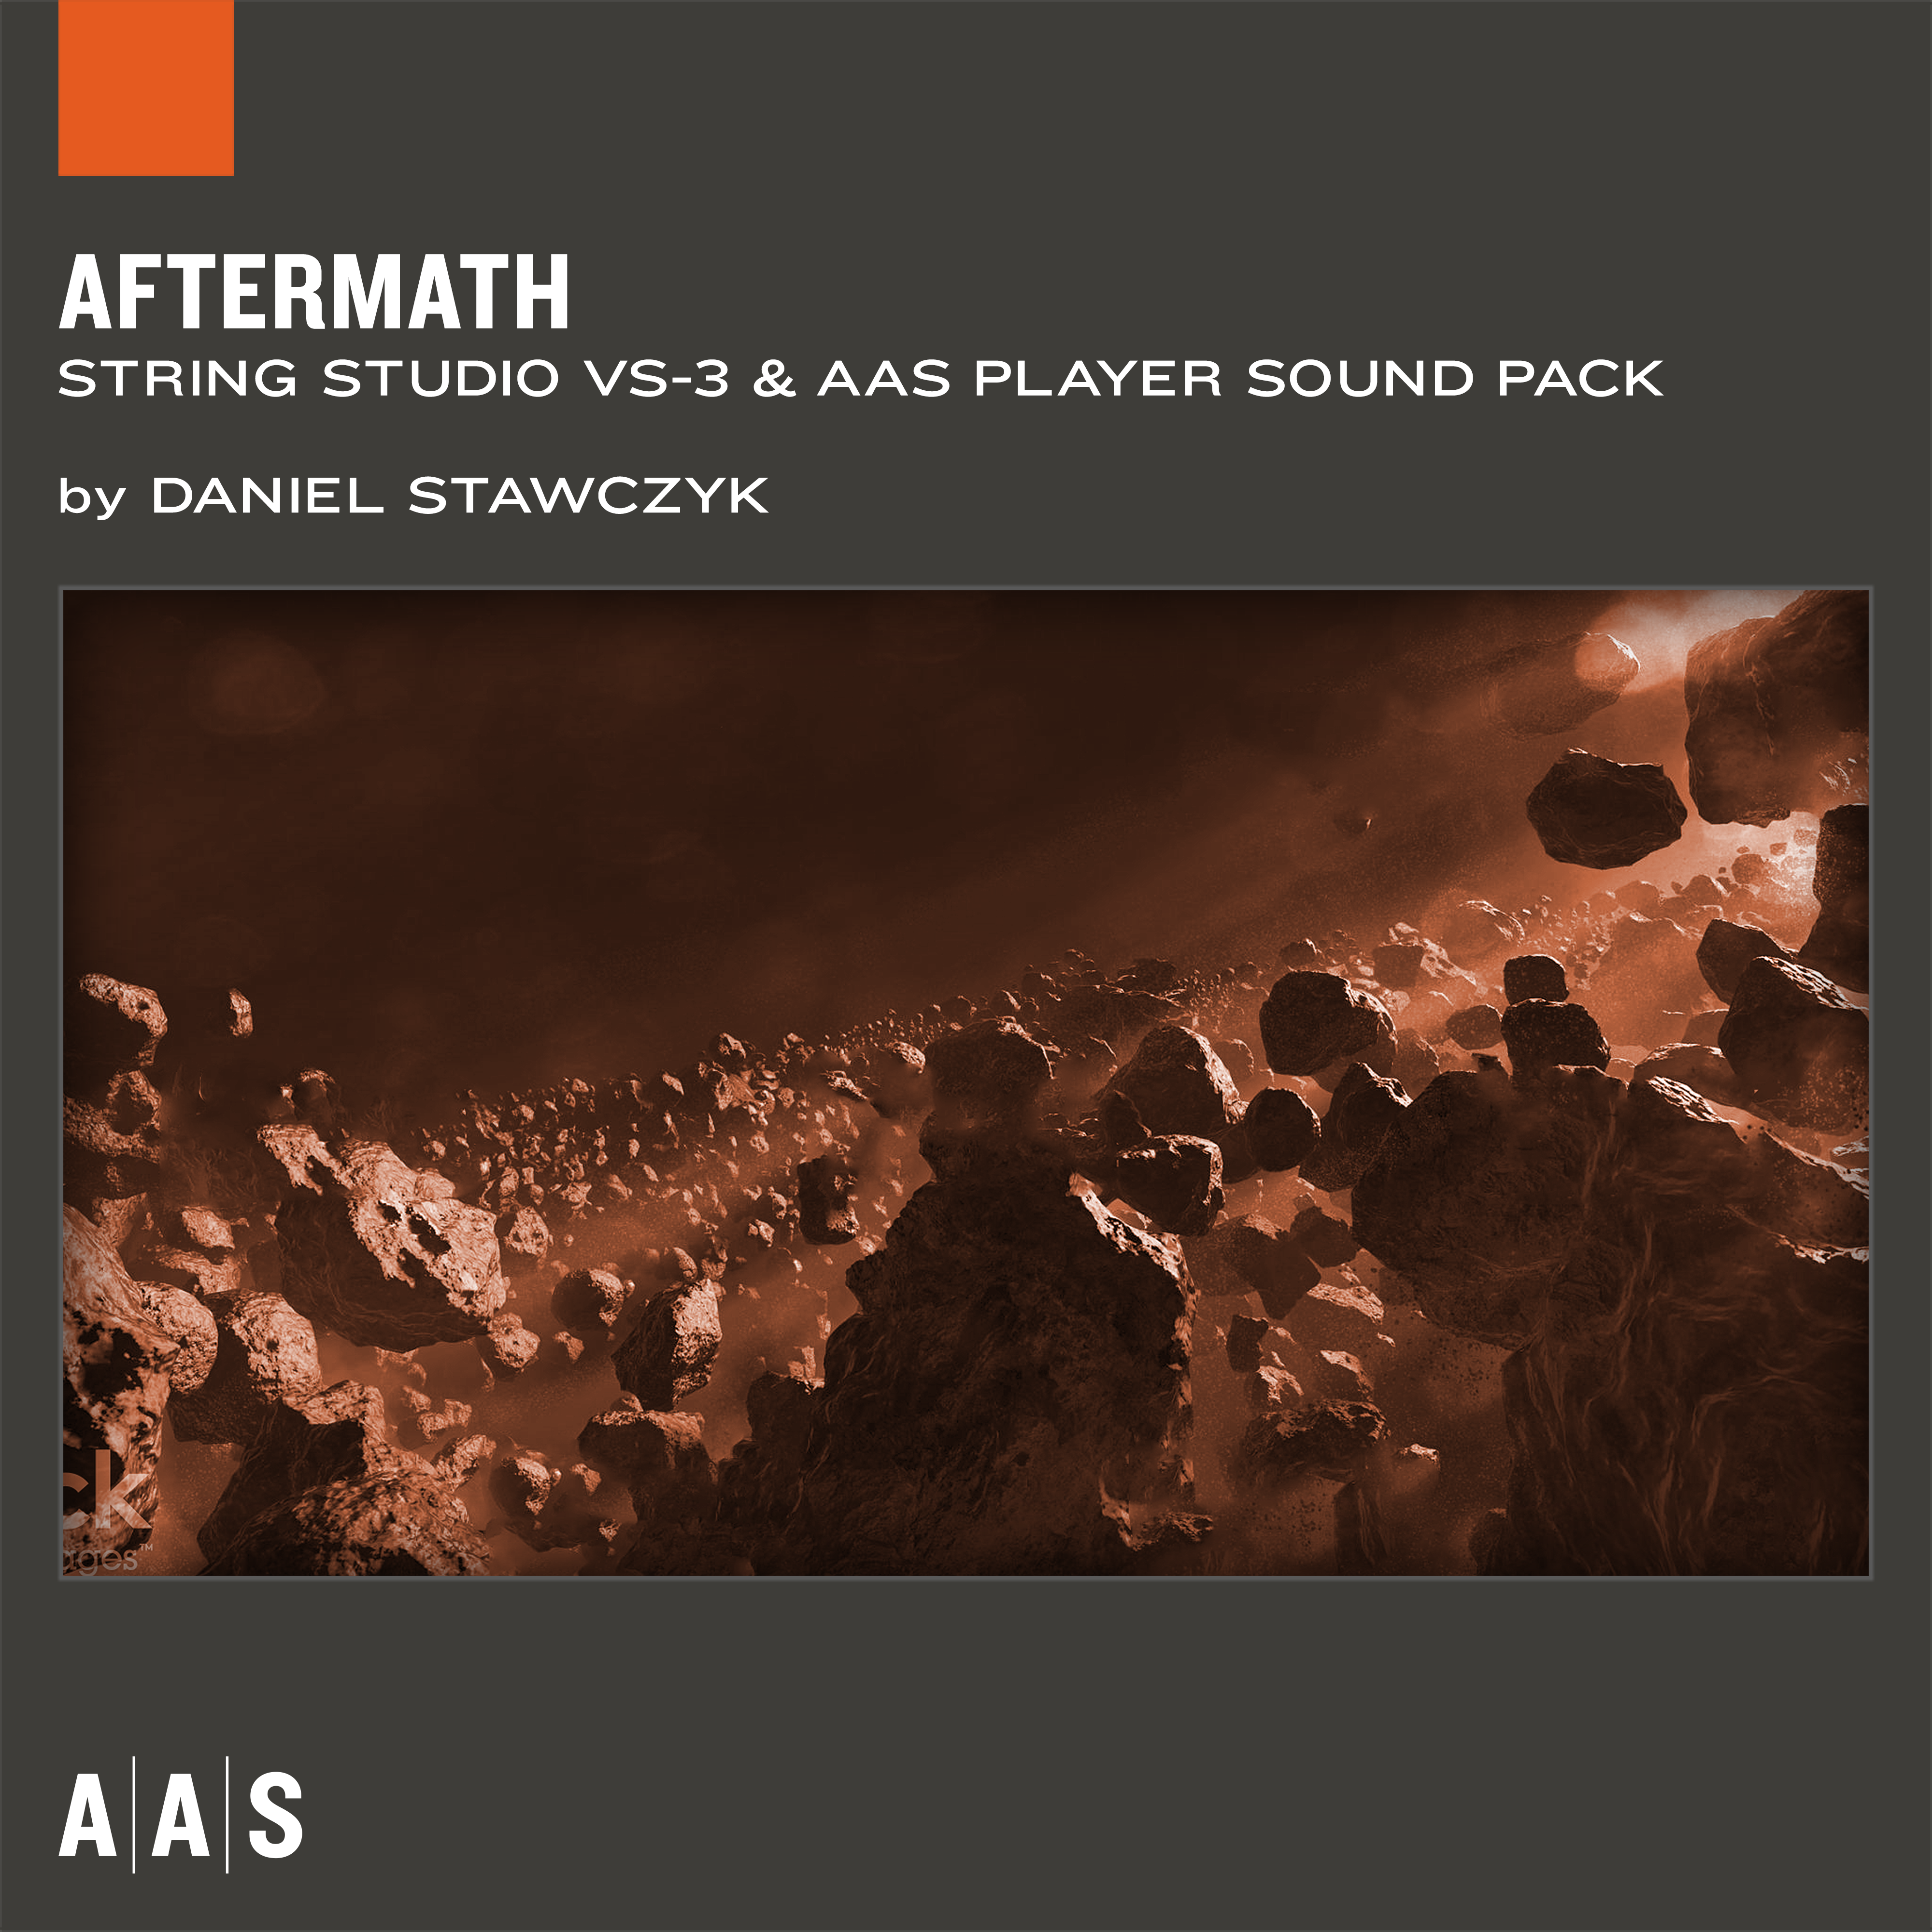 String Studio and AAS Player sound pack ： Aftermath